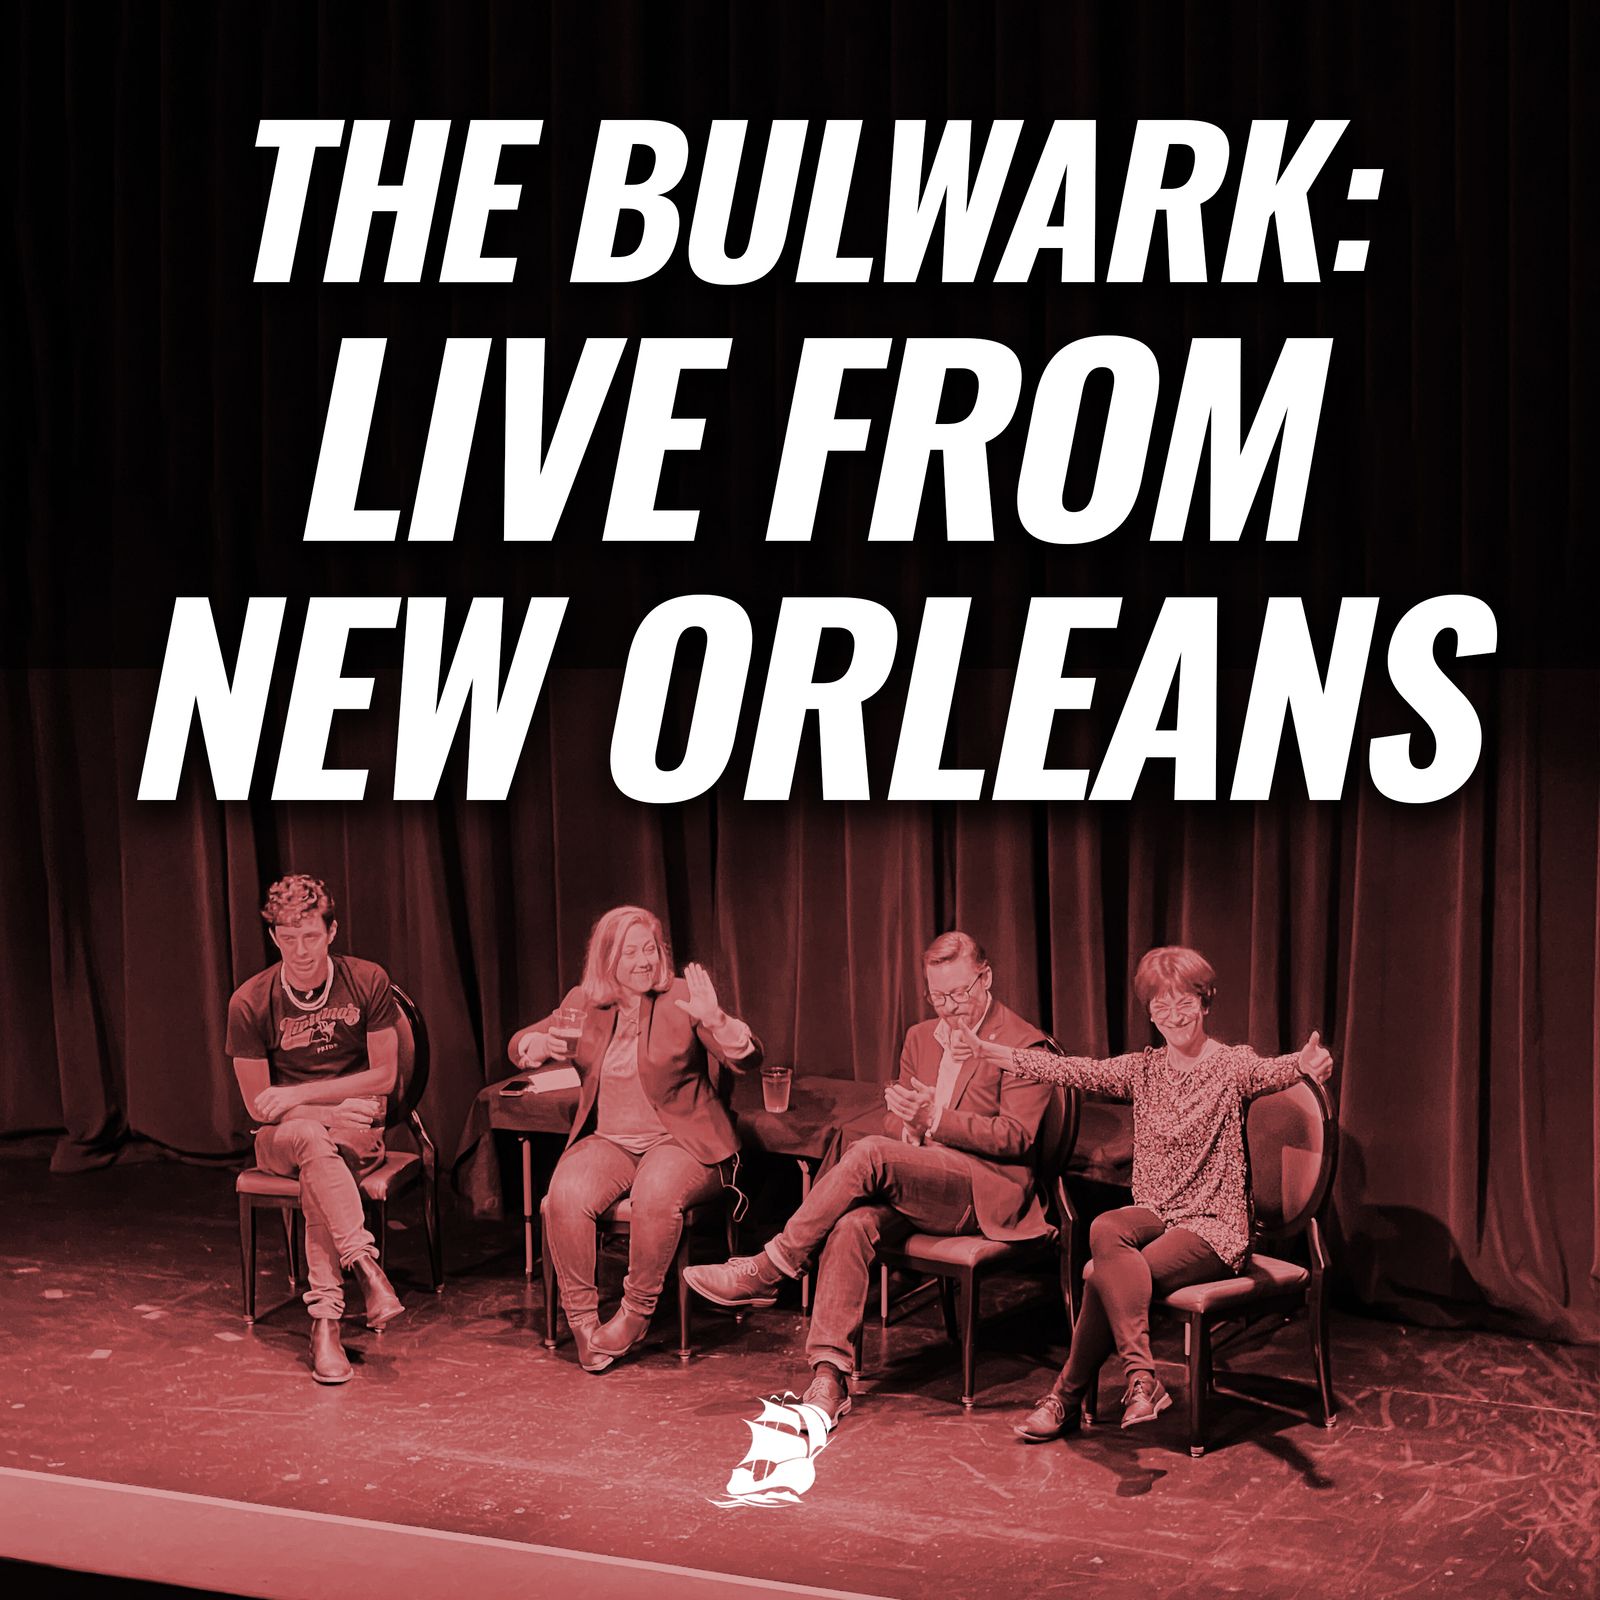 The Bulwark: Live from New Orleans by The Bulwark Podcast